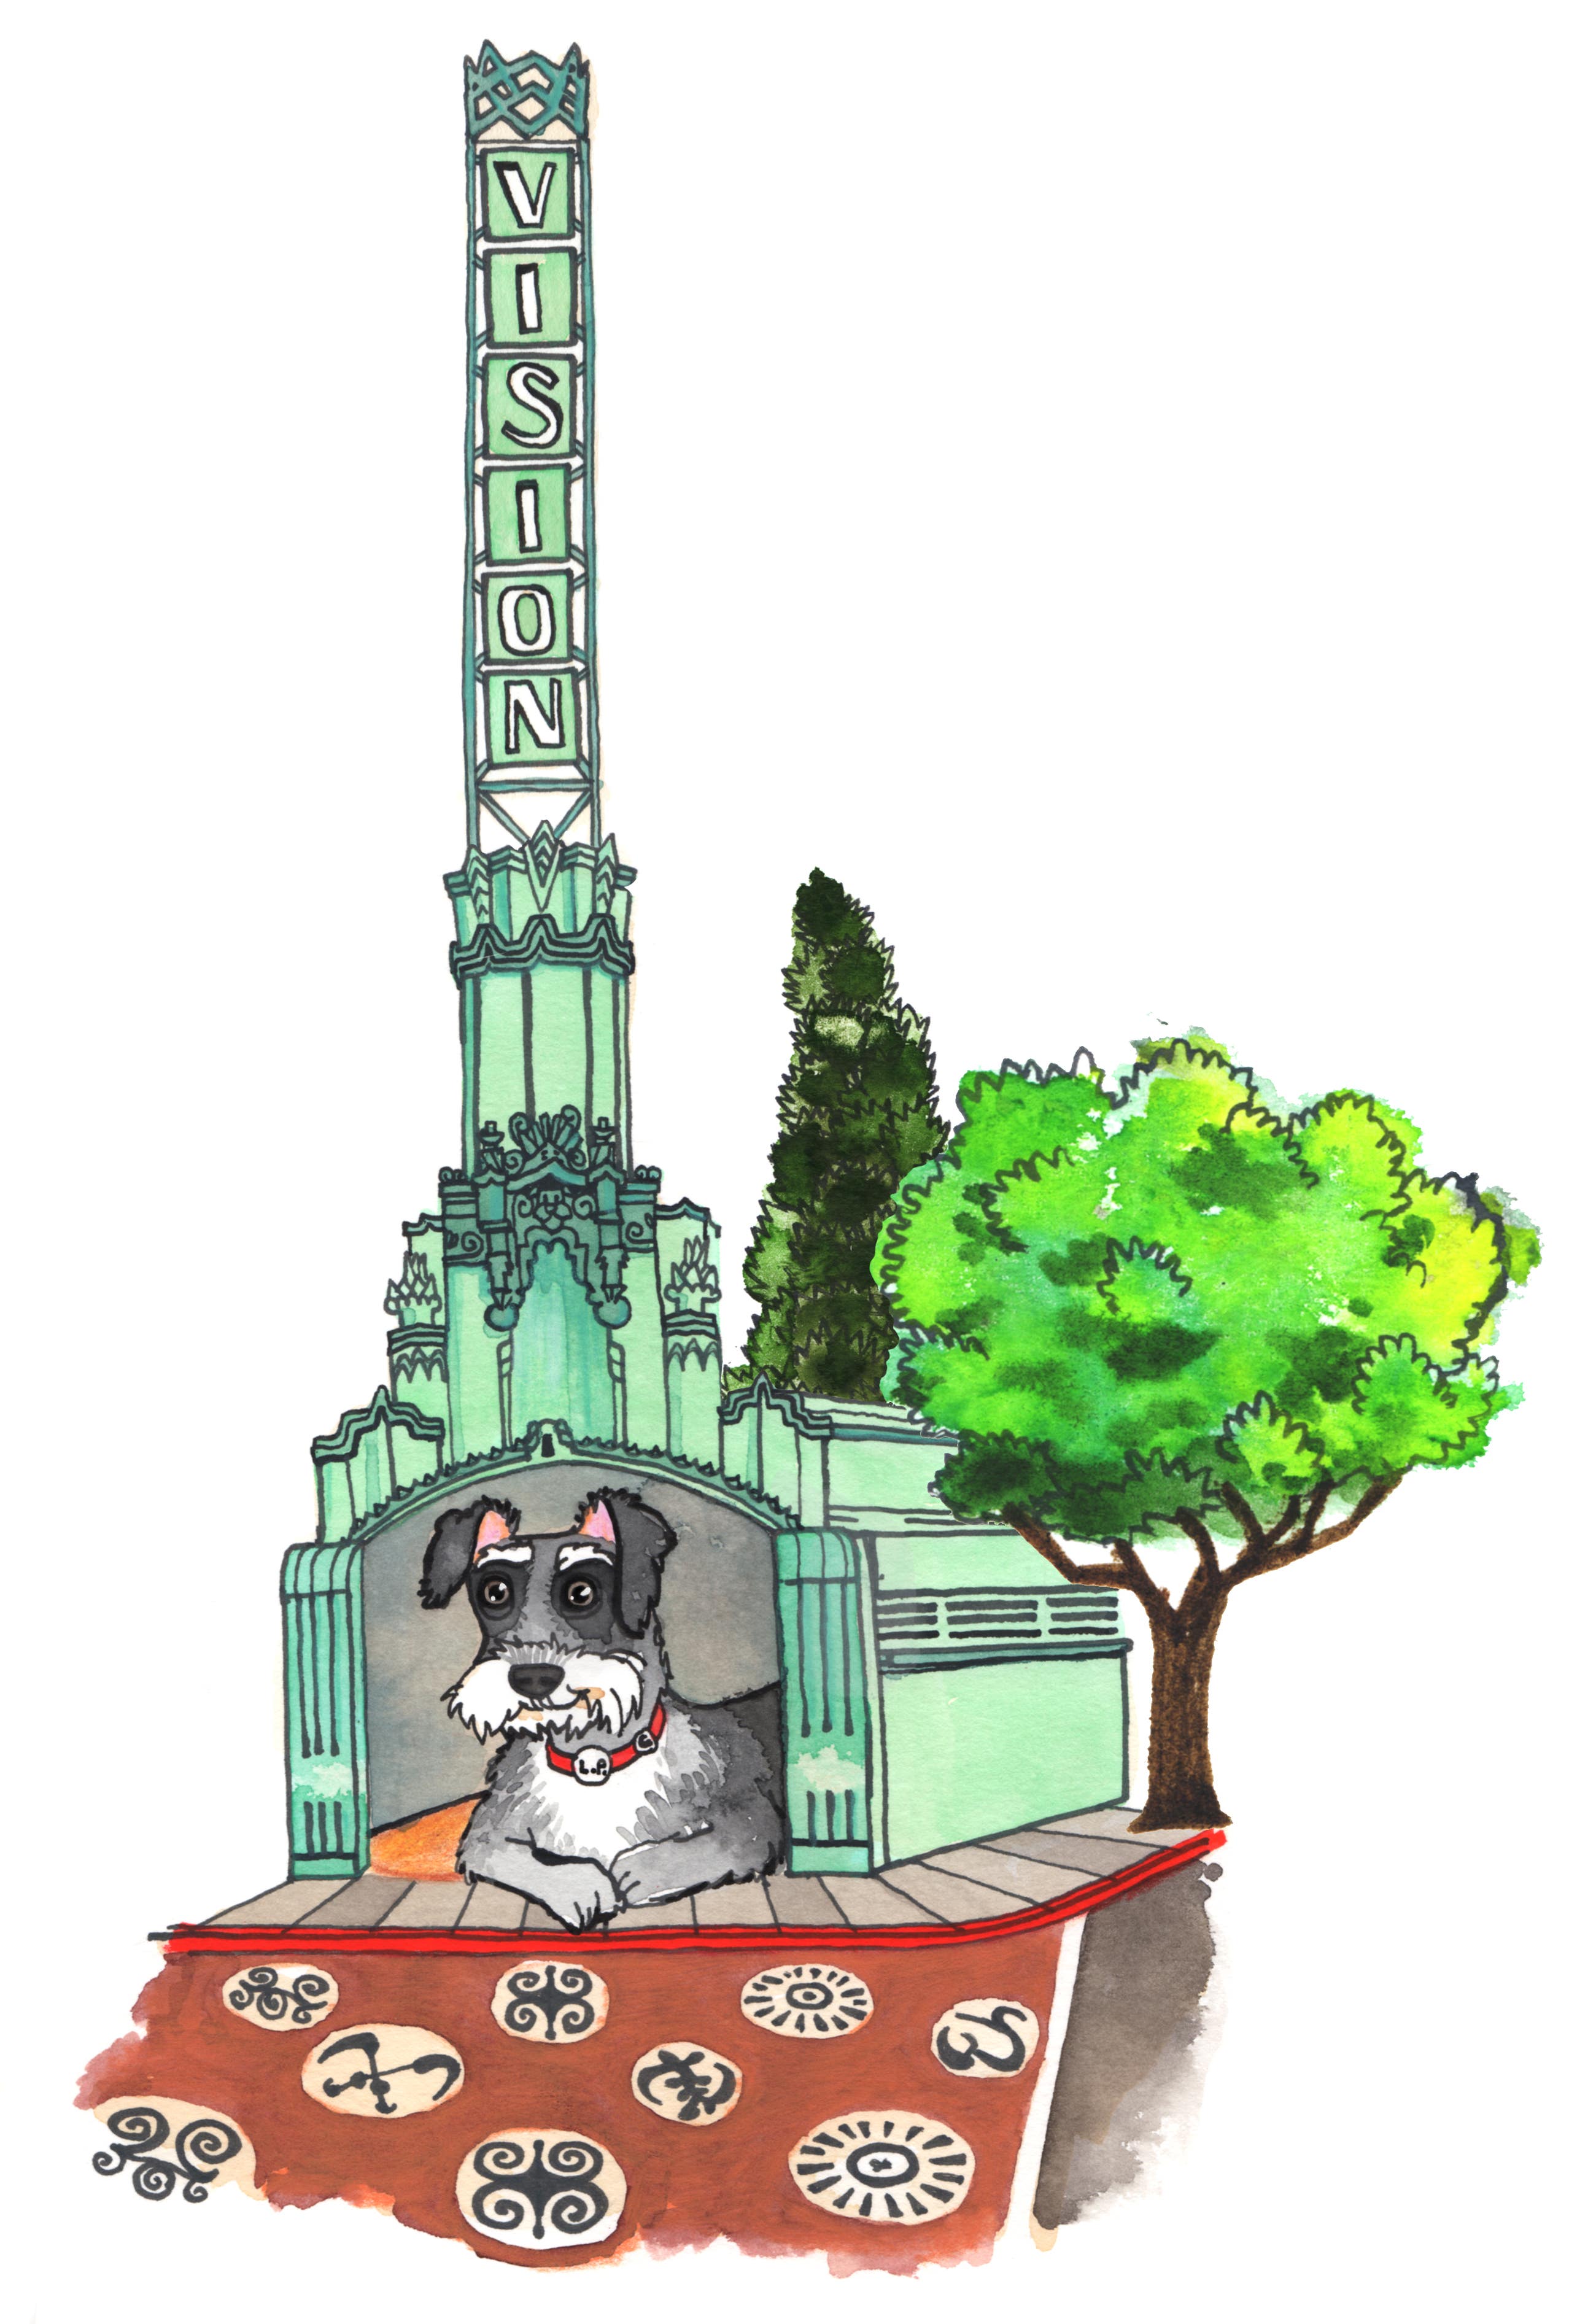 Miniature Schnauzer at the Vision Theatre in Leimert Park | Illustration by Max Kornell